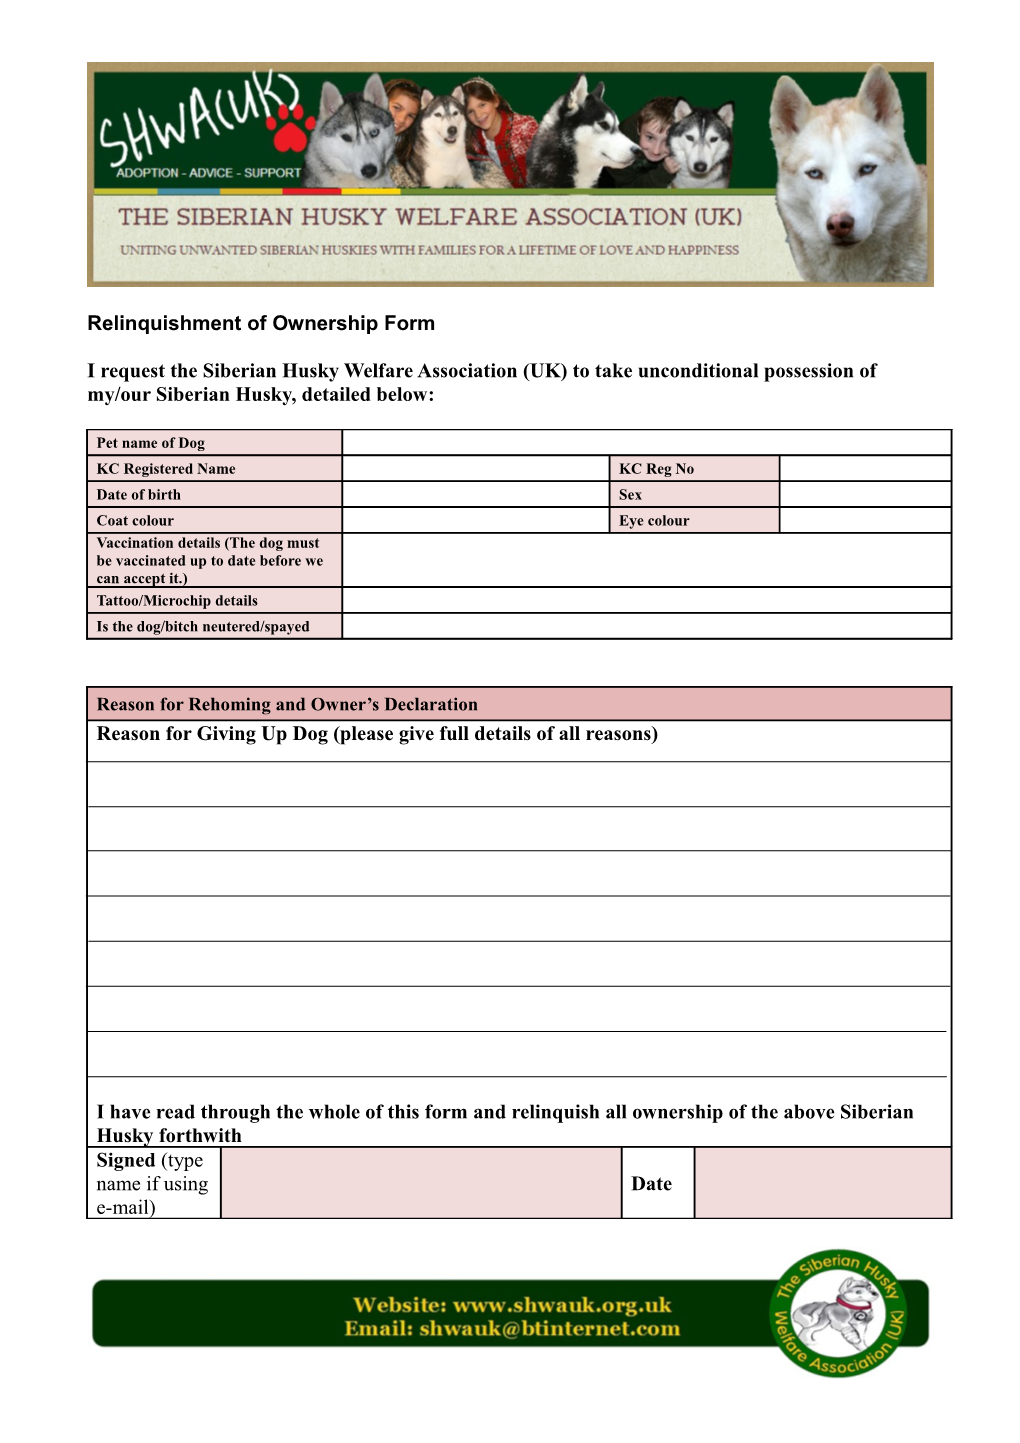 Relinquishment of Ownership Form